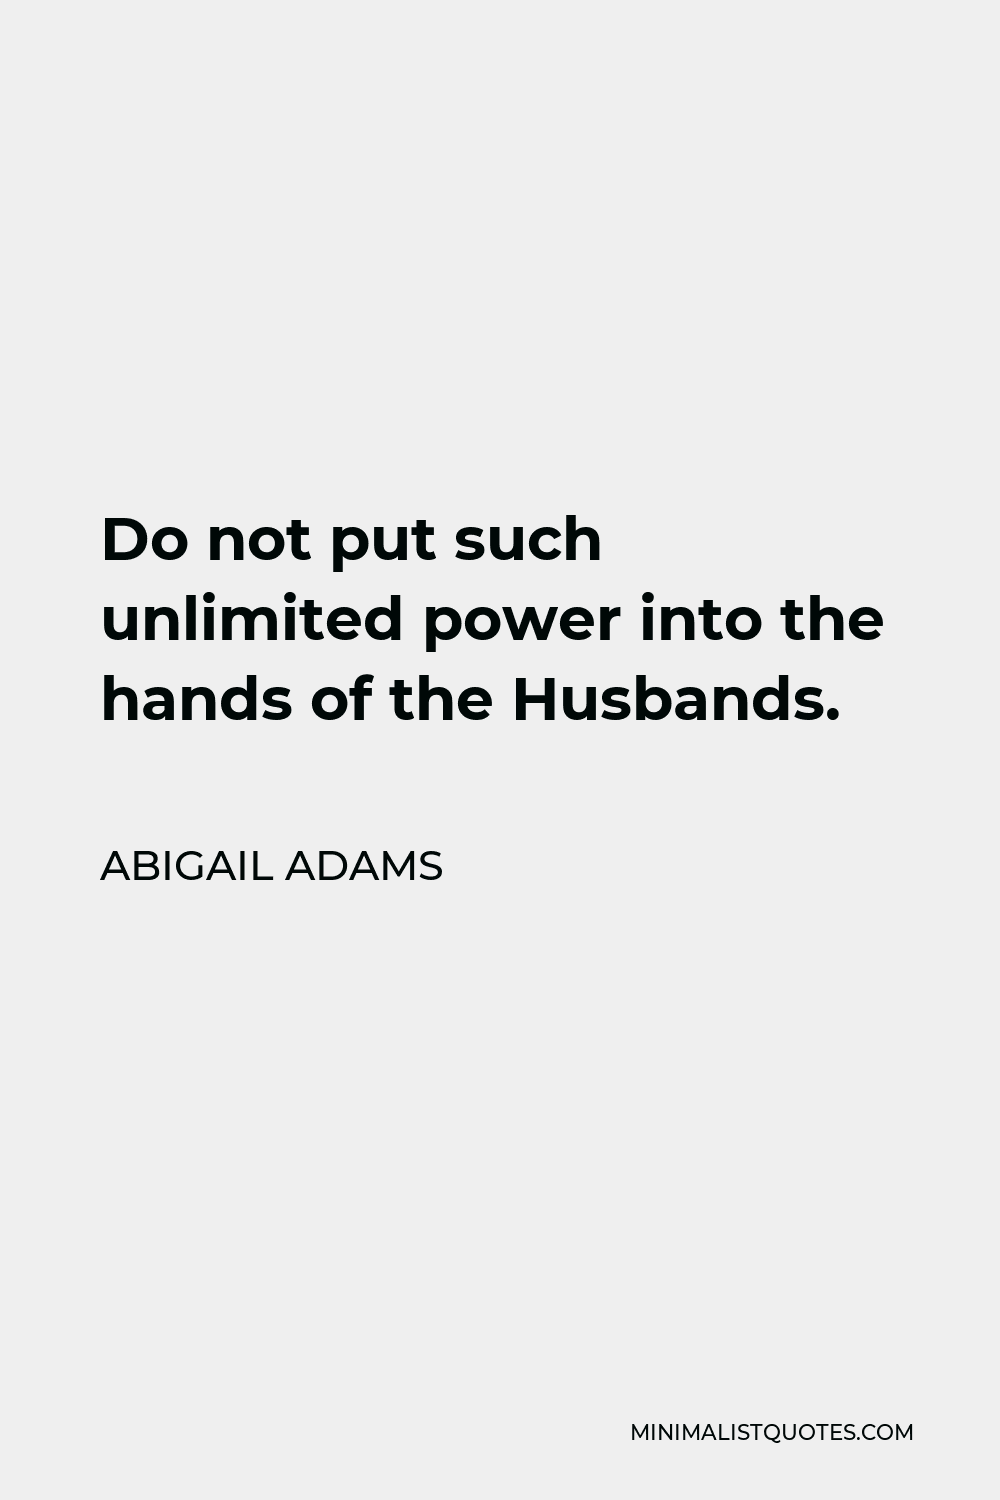 Abigail Adams Quote - Do not put such unlimited power into the hands of husbands. Remember all men would be tyrants if they could.